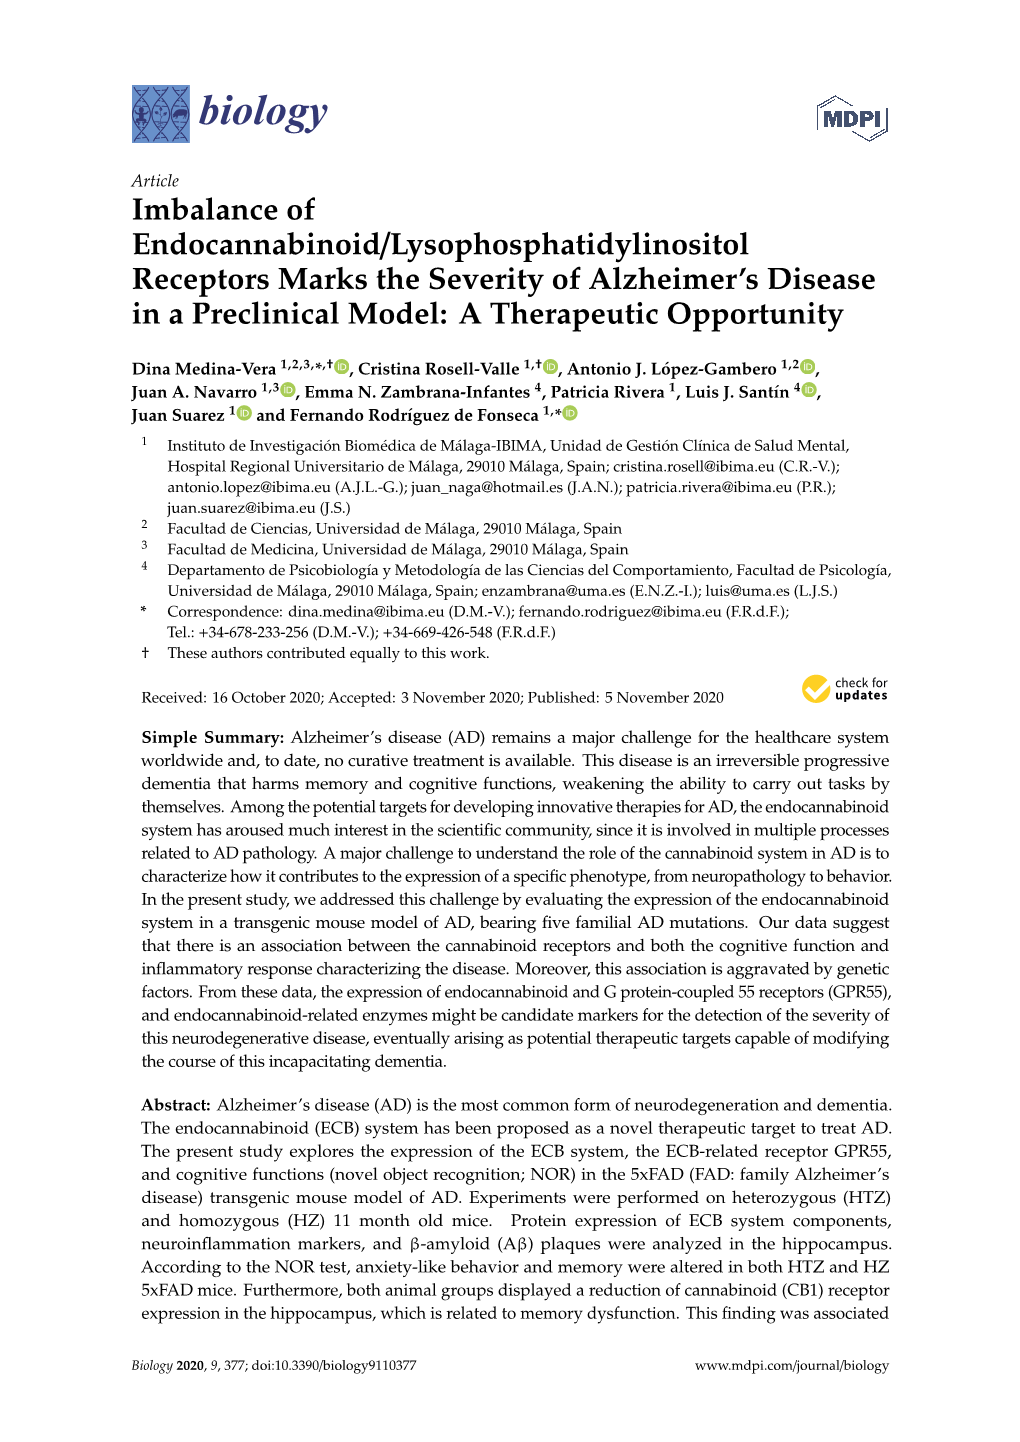 Imbalance of Endocannabinoid/Lysophosphatidylinositol Receptors Marks the Severity of Alzheimer’S Disease in a Preclinical Model: a Therapeutic Opportunity